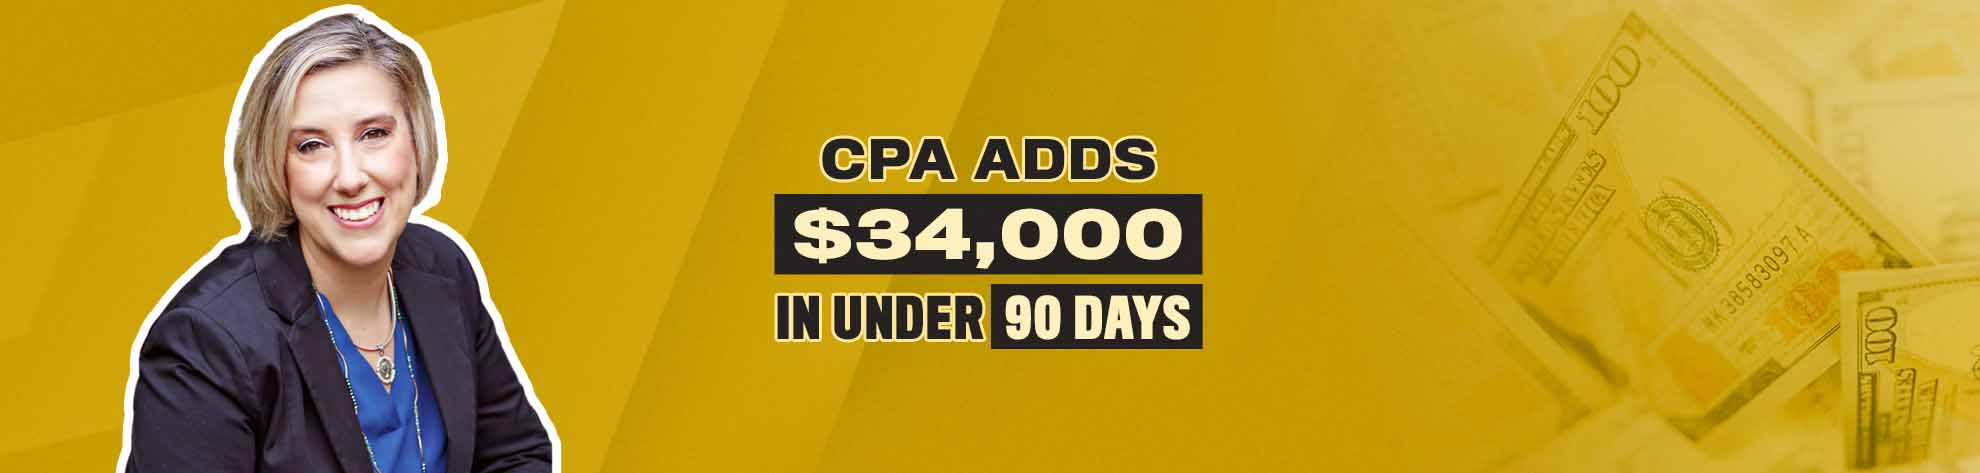 more clients for cpa